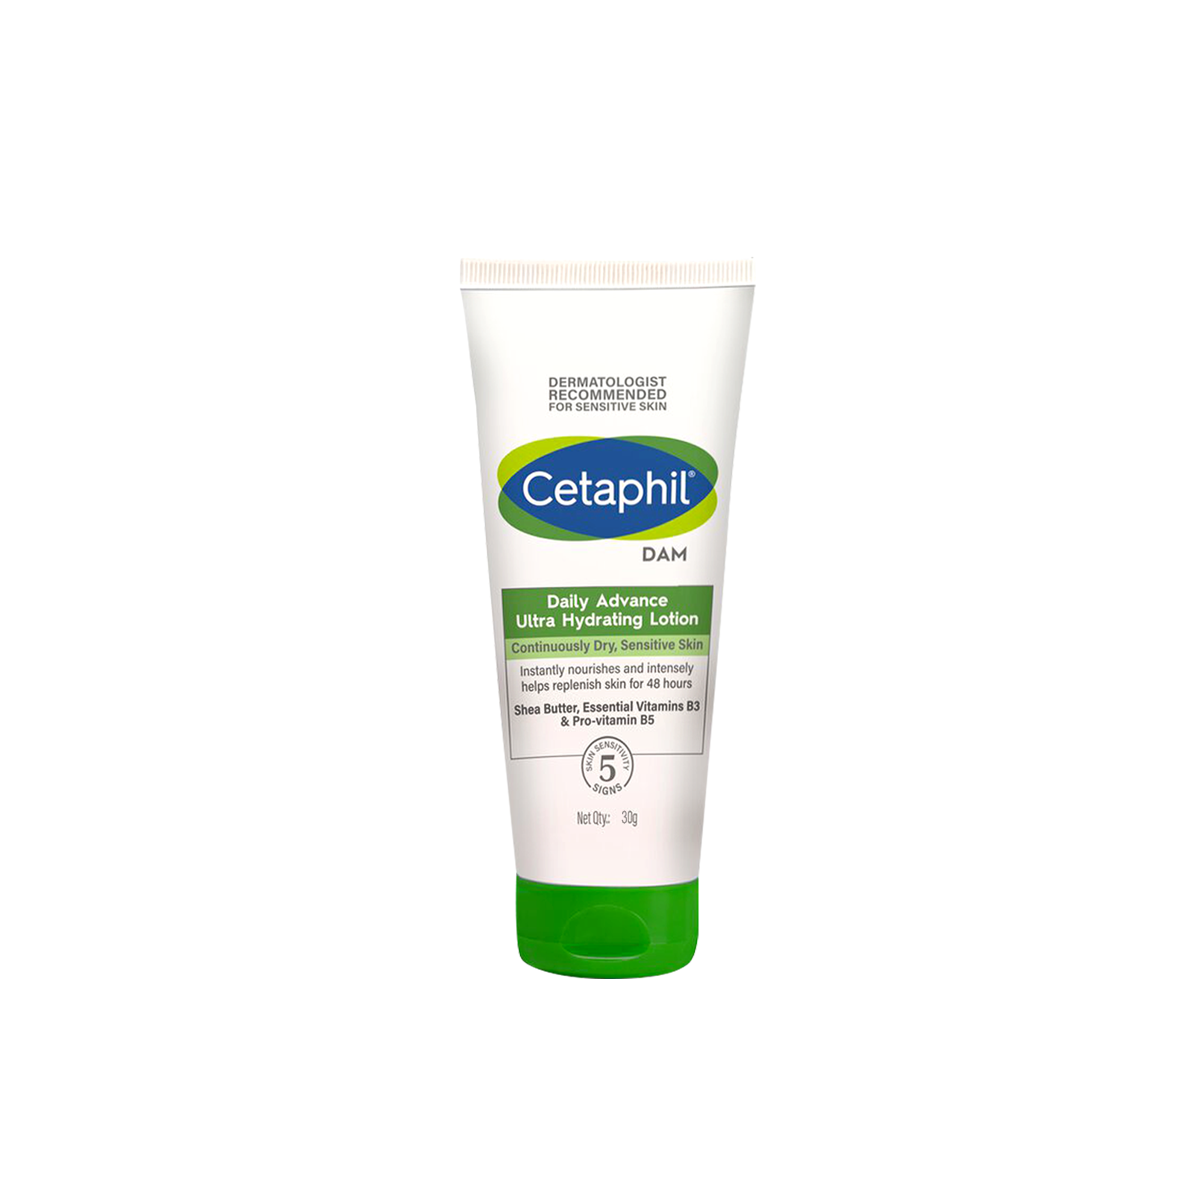 Cetaphil DAM Daily Advance Hydrating Lotion 30g